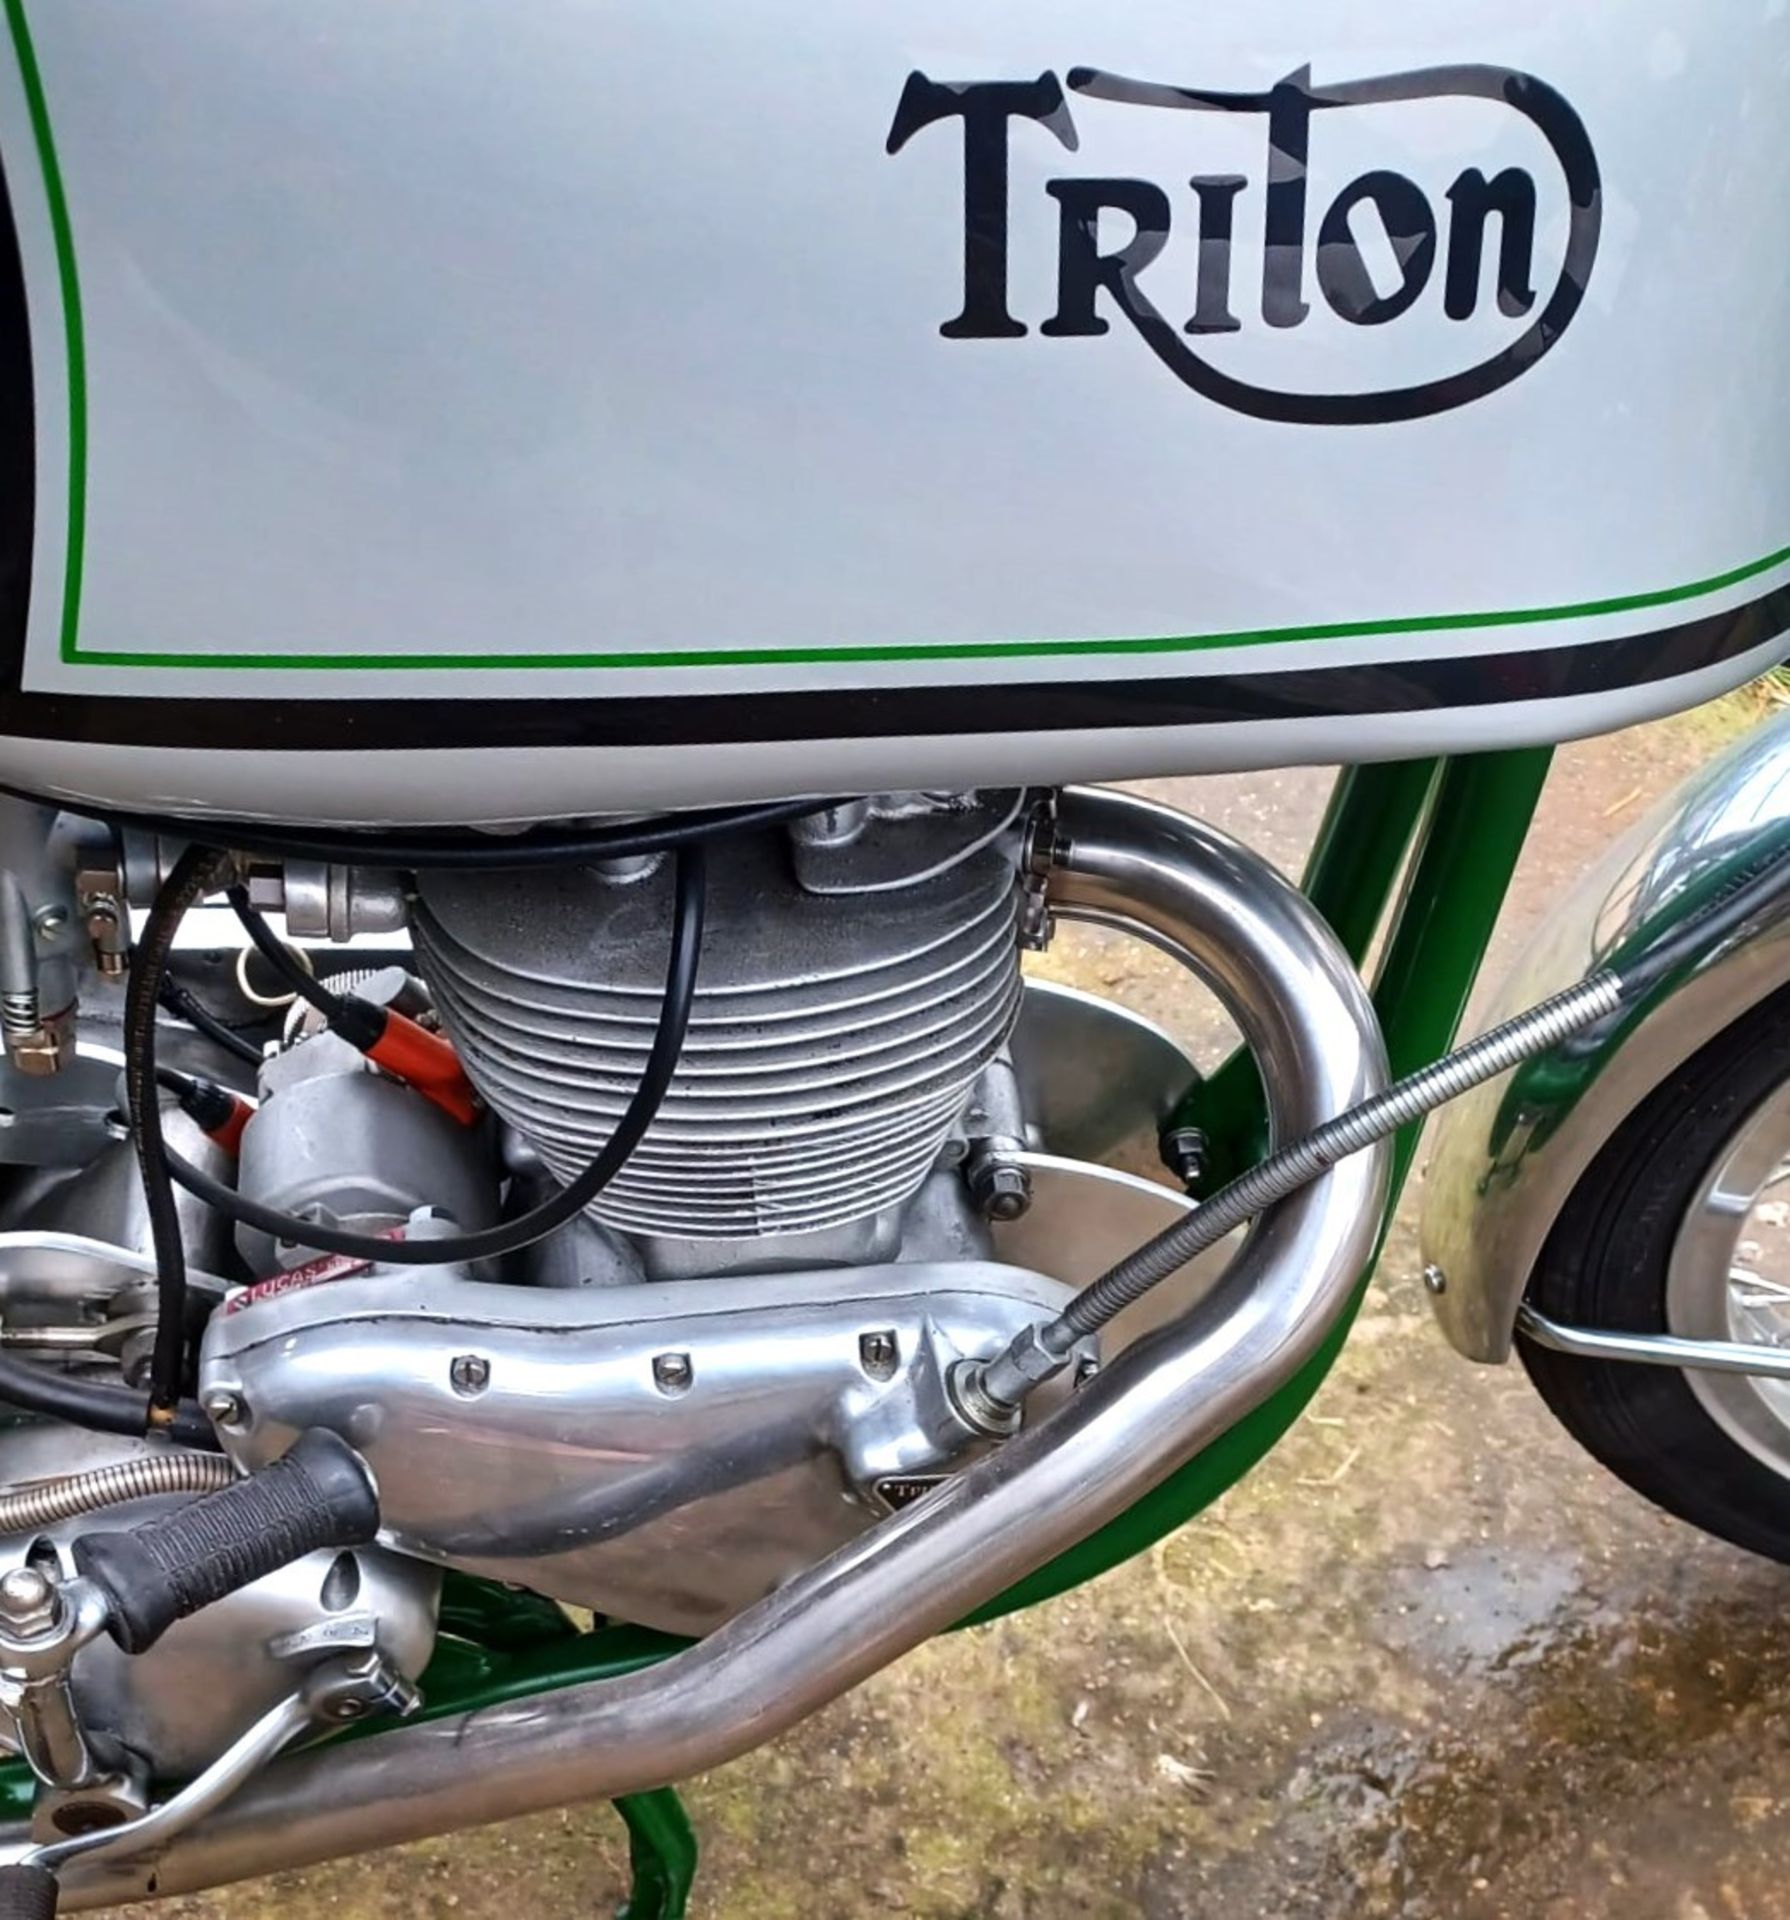 1958 TRITON 650cc Registration Number: 482 XVW Frame Number: TBA Recorded Mileage: 14 miles - - Image 8 of 16